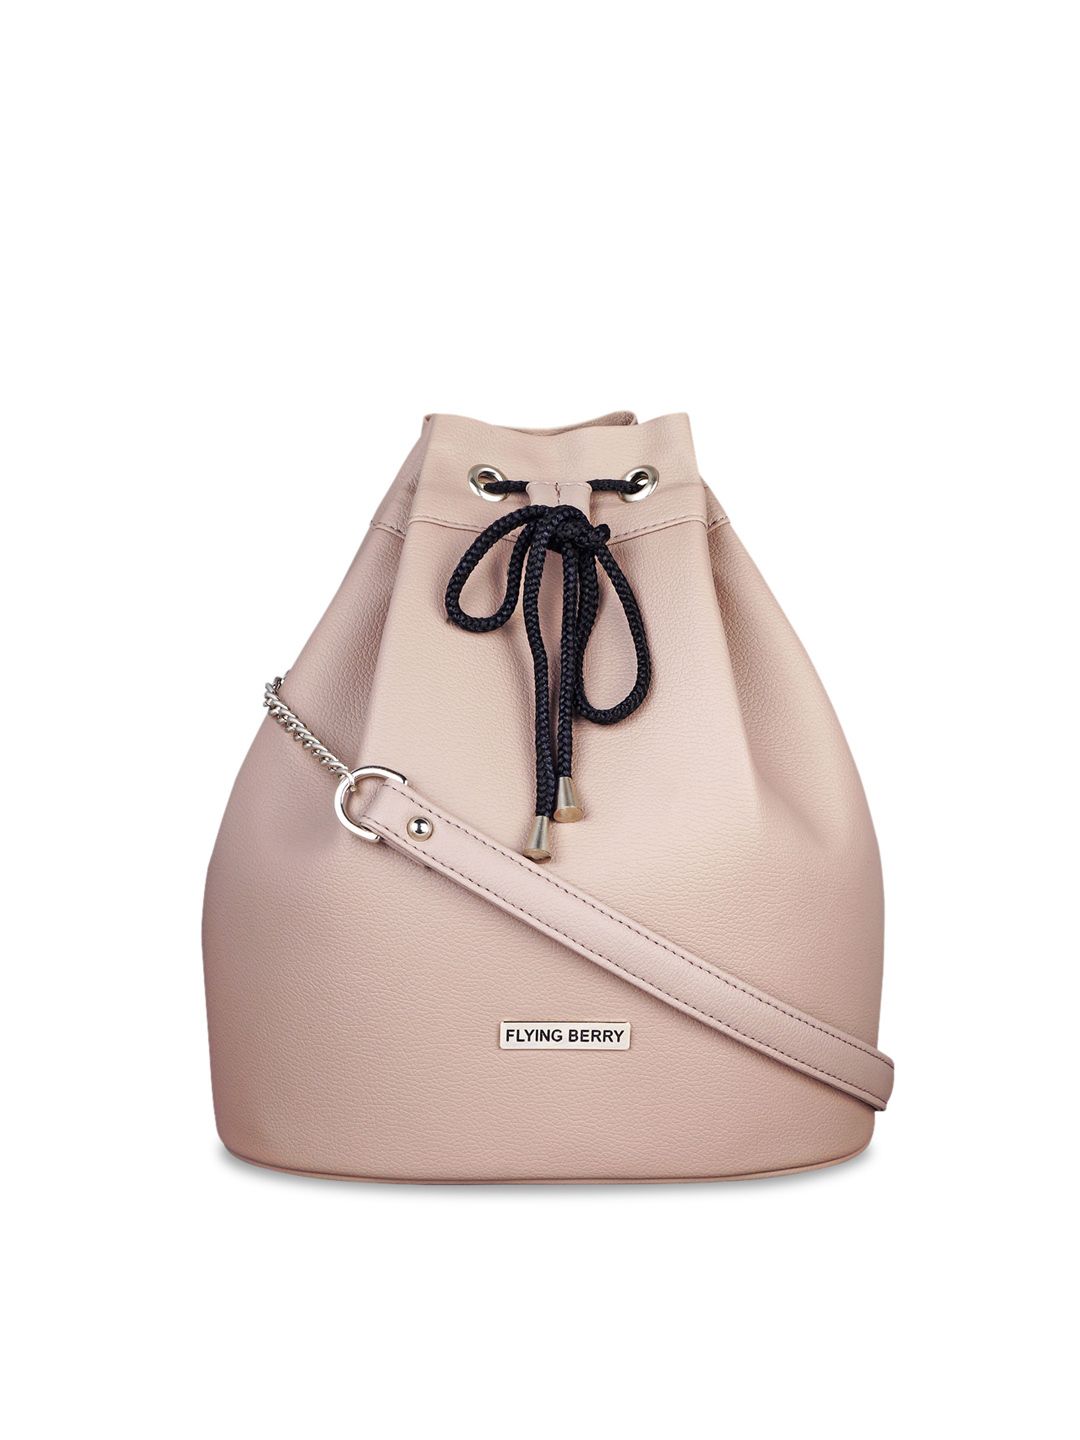 FLYING BERRY Mauve PU Bucket Sling Bag Price in India